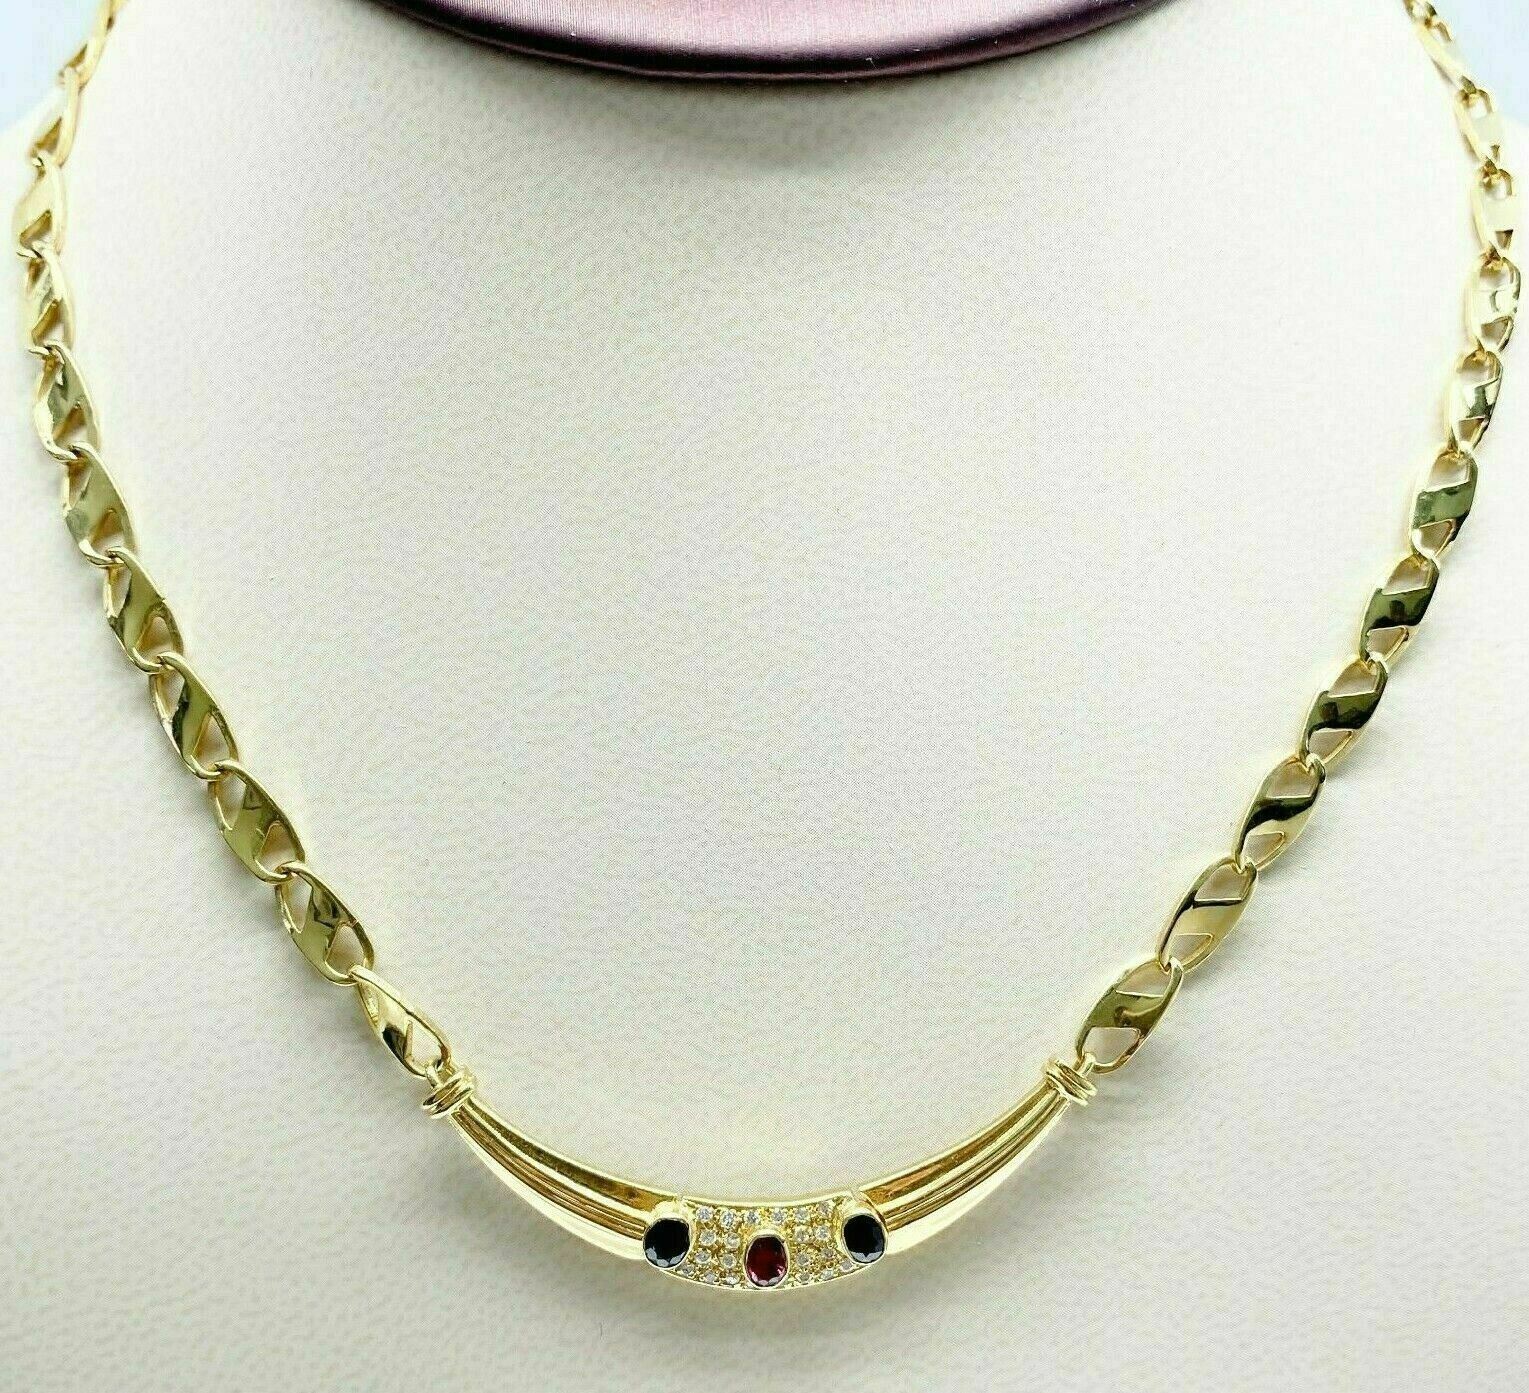 0.82 Carats t.w. Solid 18 Karat Yellow Gold Diamond Ruby and Sapphire Necklace